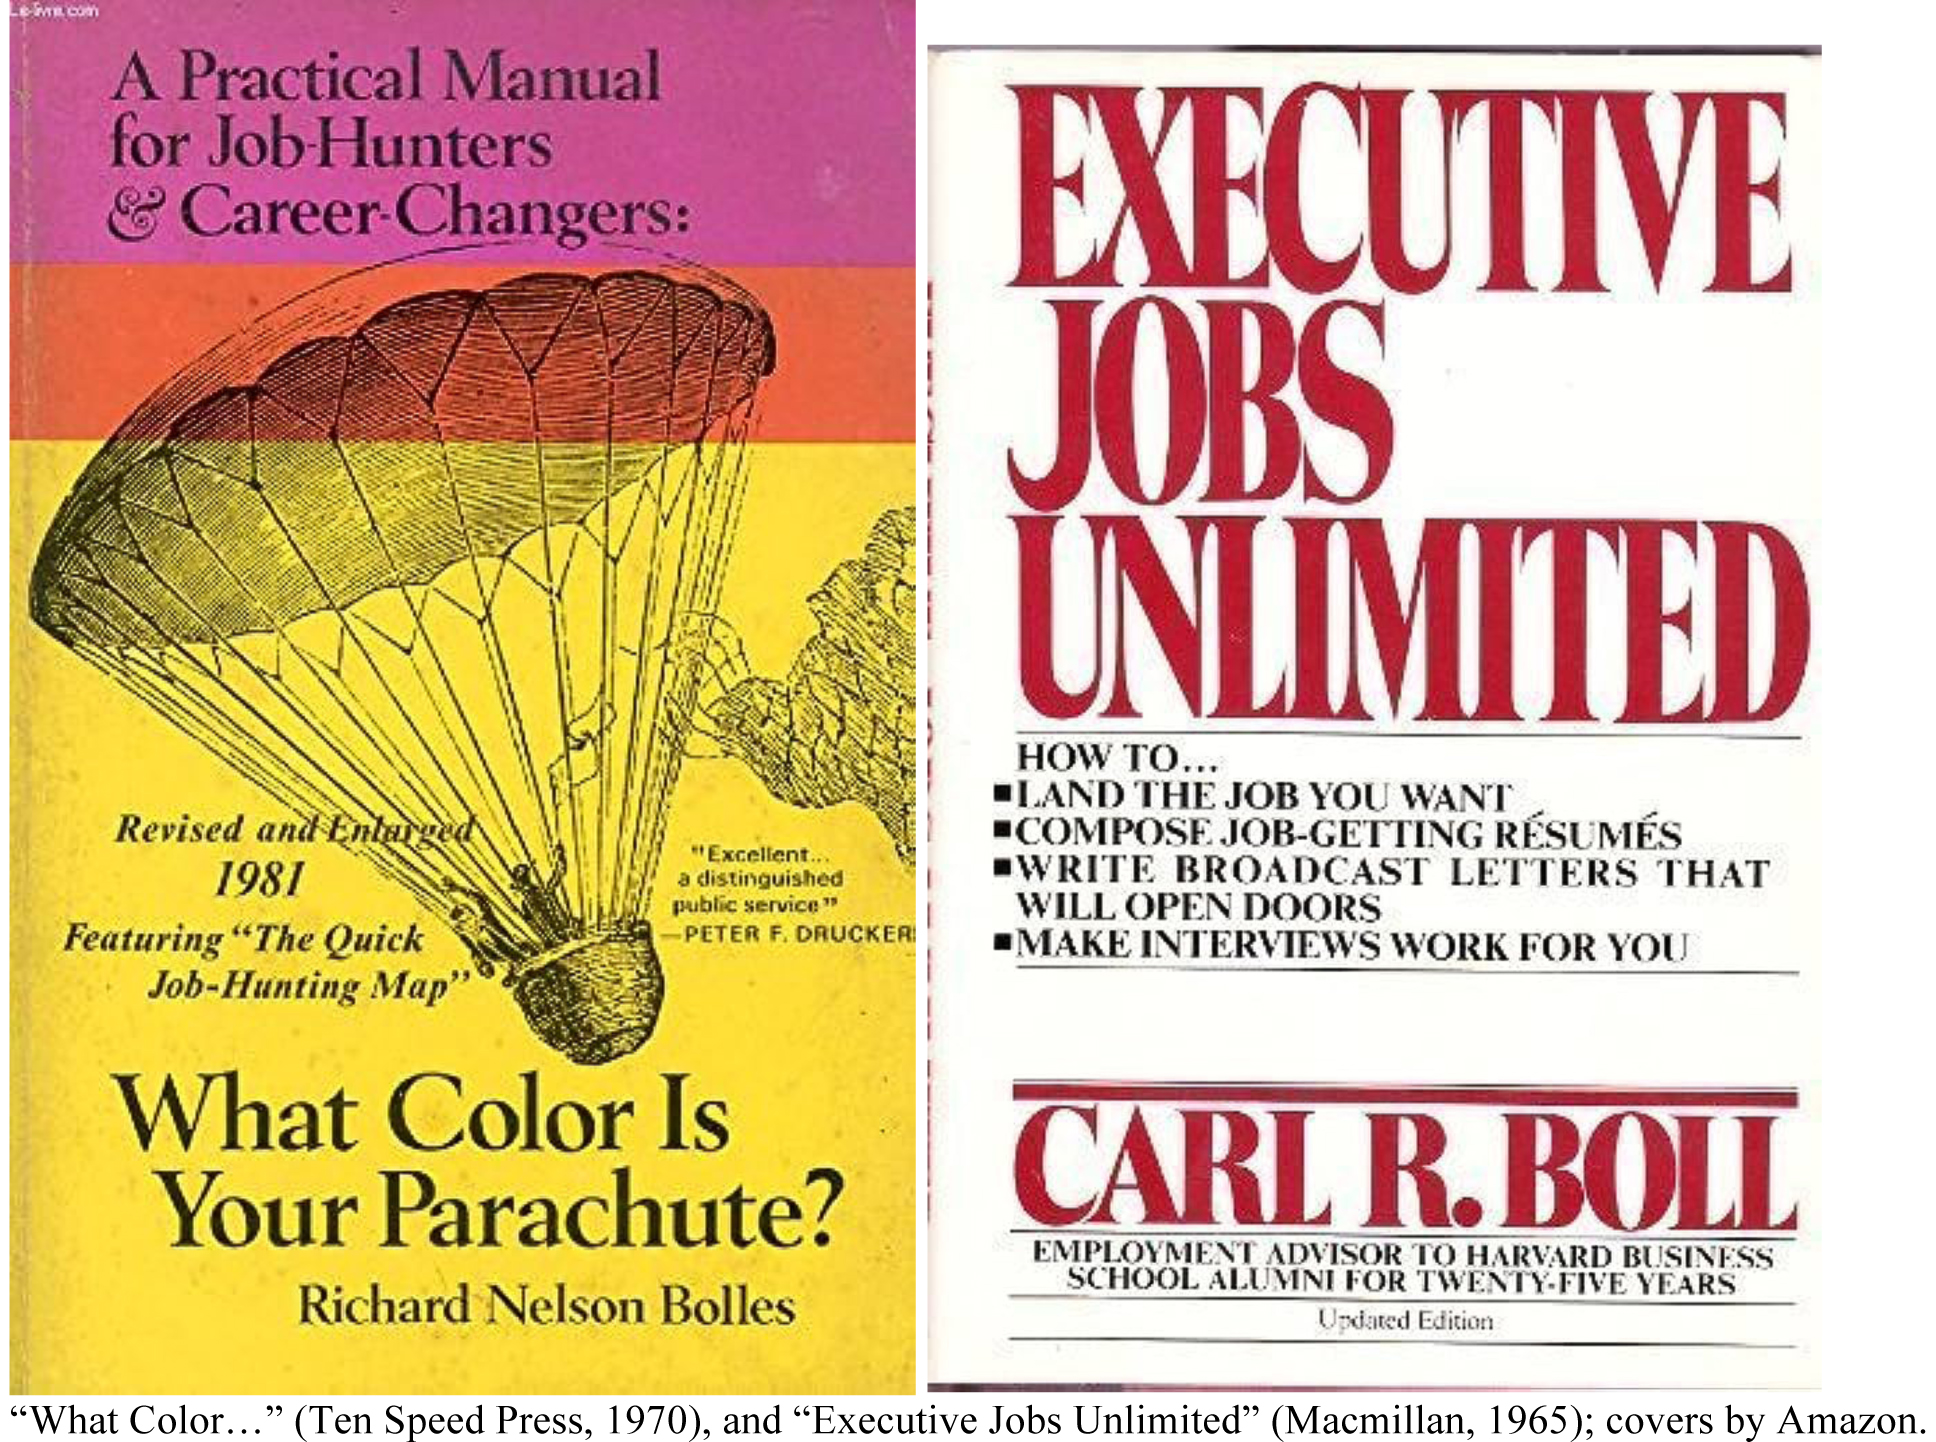 Two Books to help Build a Career Images